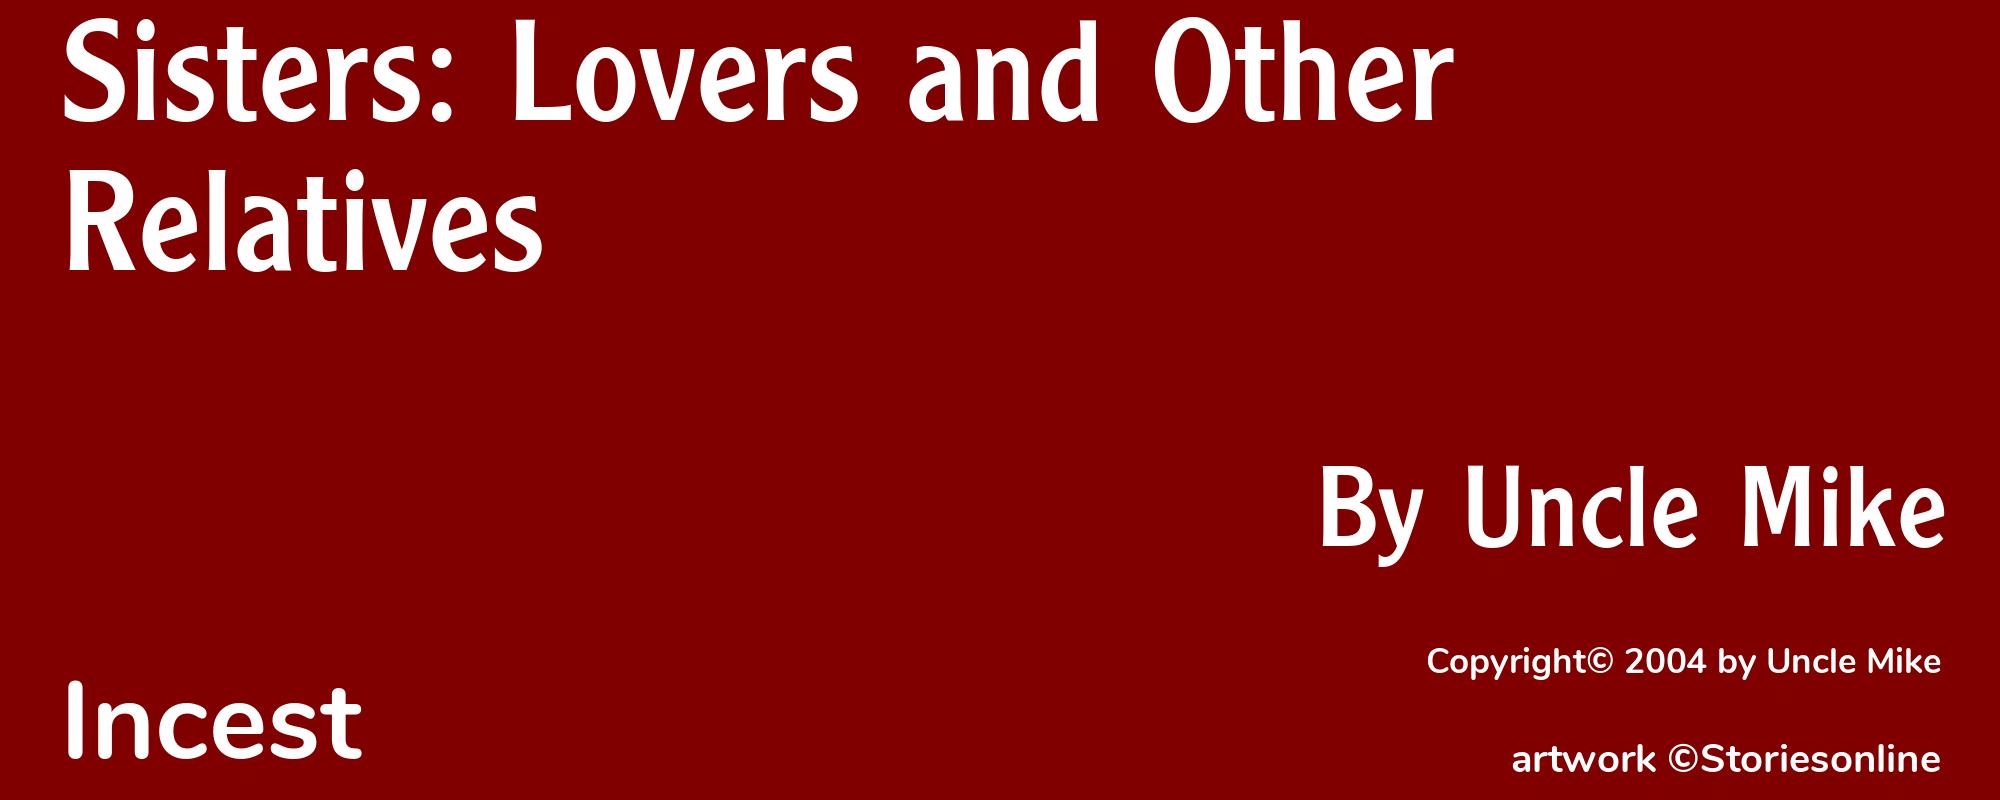 Sisters: Lovers and Other Relatives - Cover